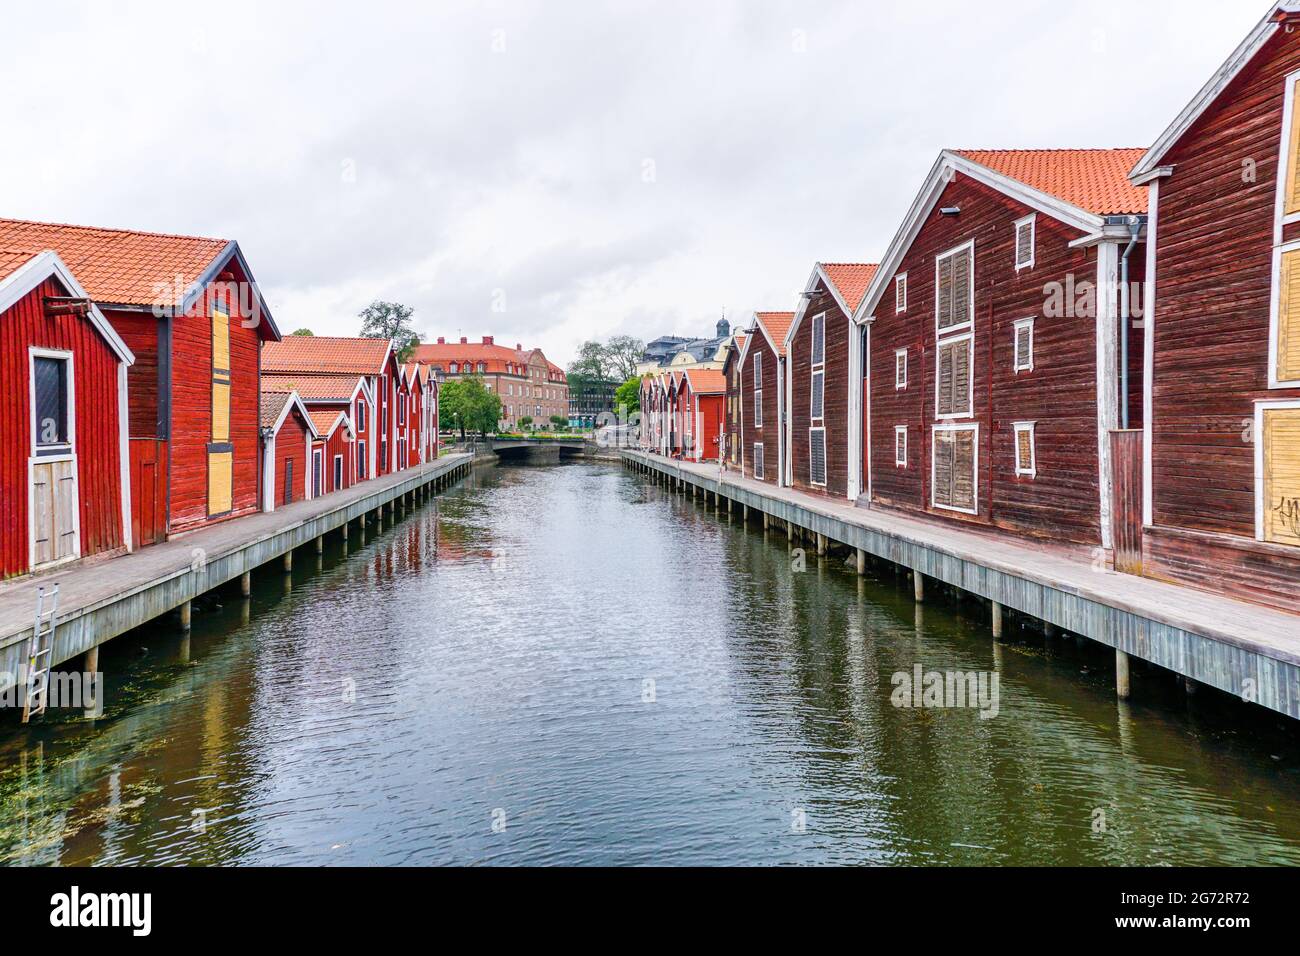 Hudiksvall, Sweden - 7 July, 2021: colorful wooden buildings line the canal in downtown Hudiskvall Stock Photo